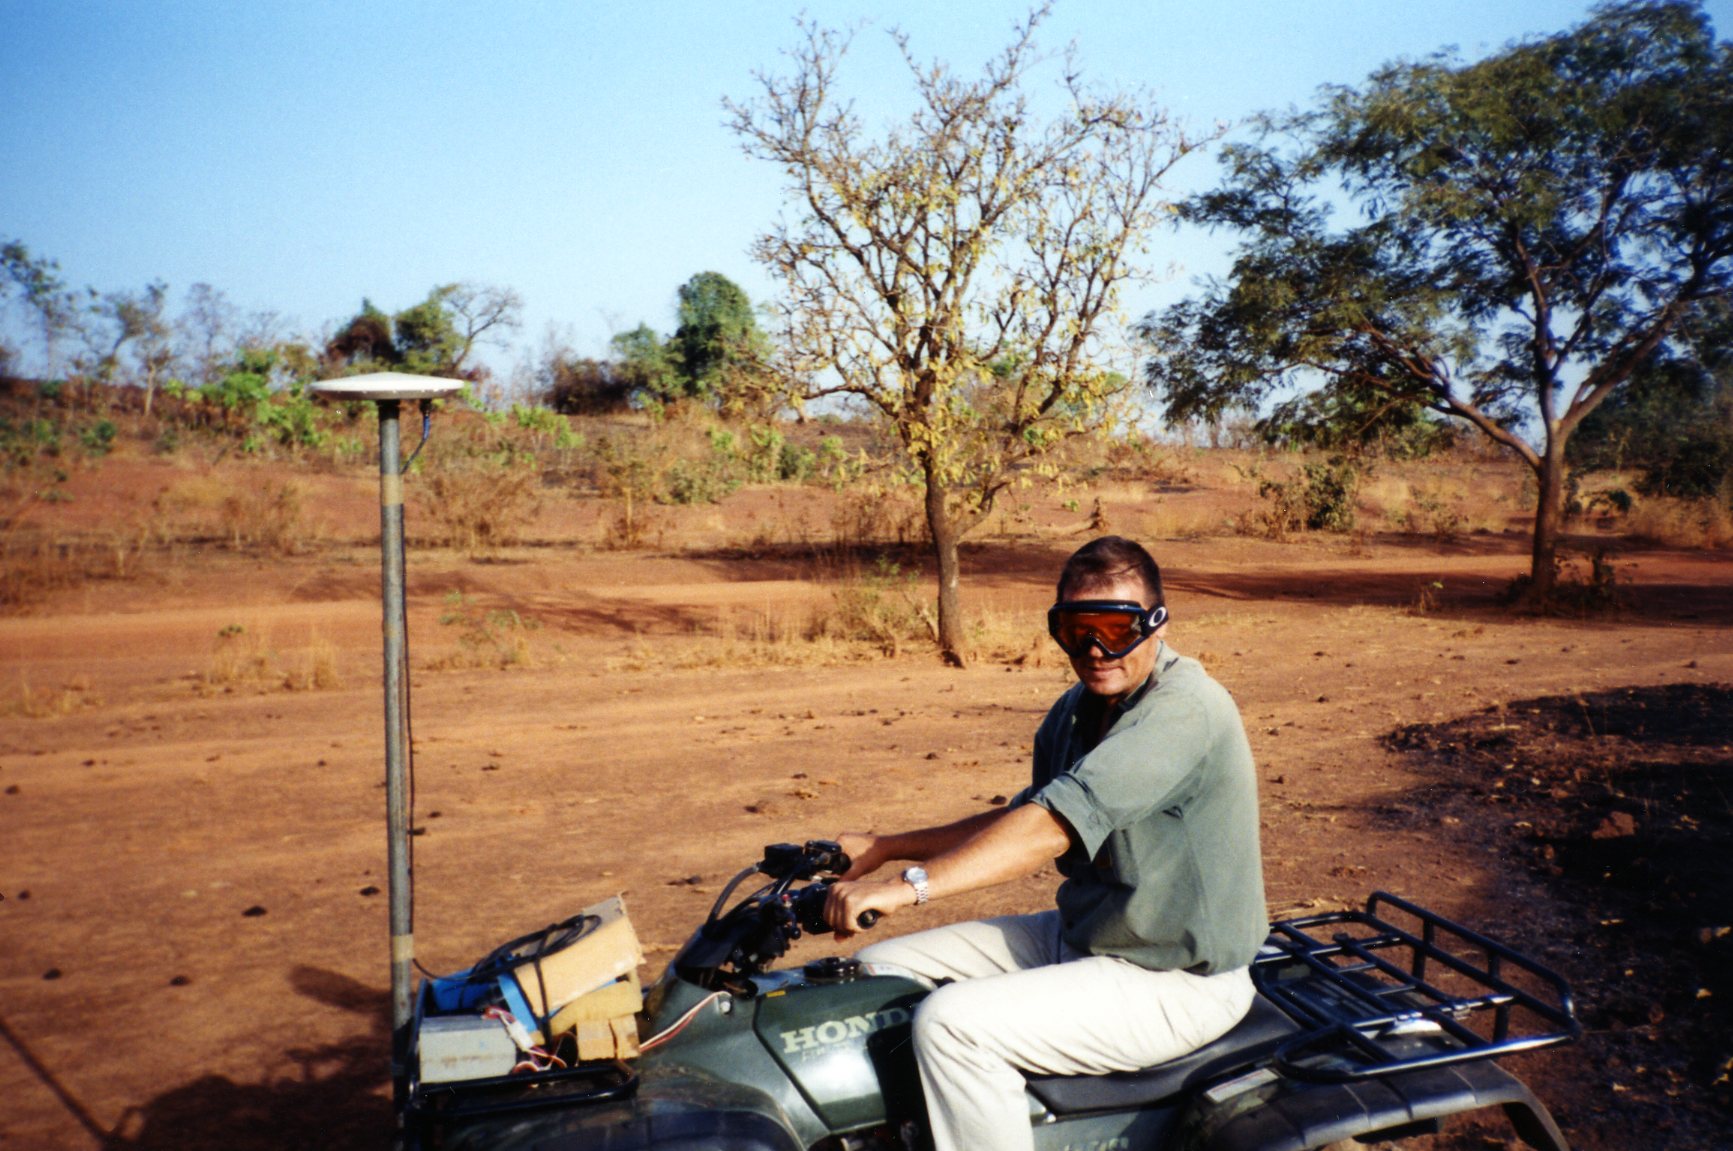 surveying with a quad bike in Africa